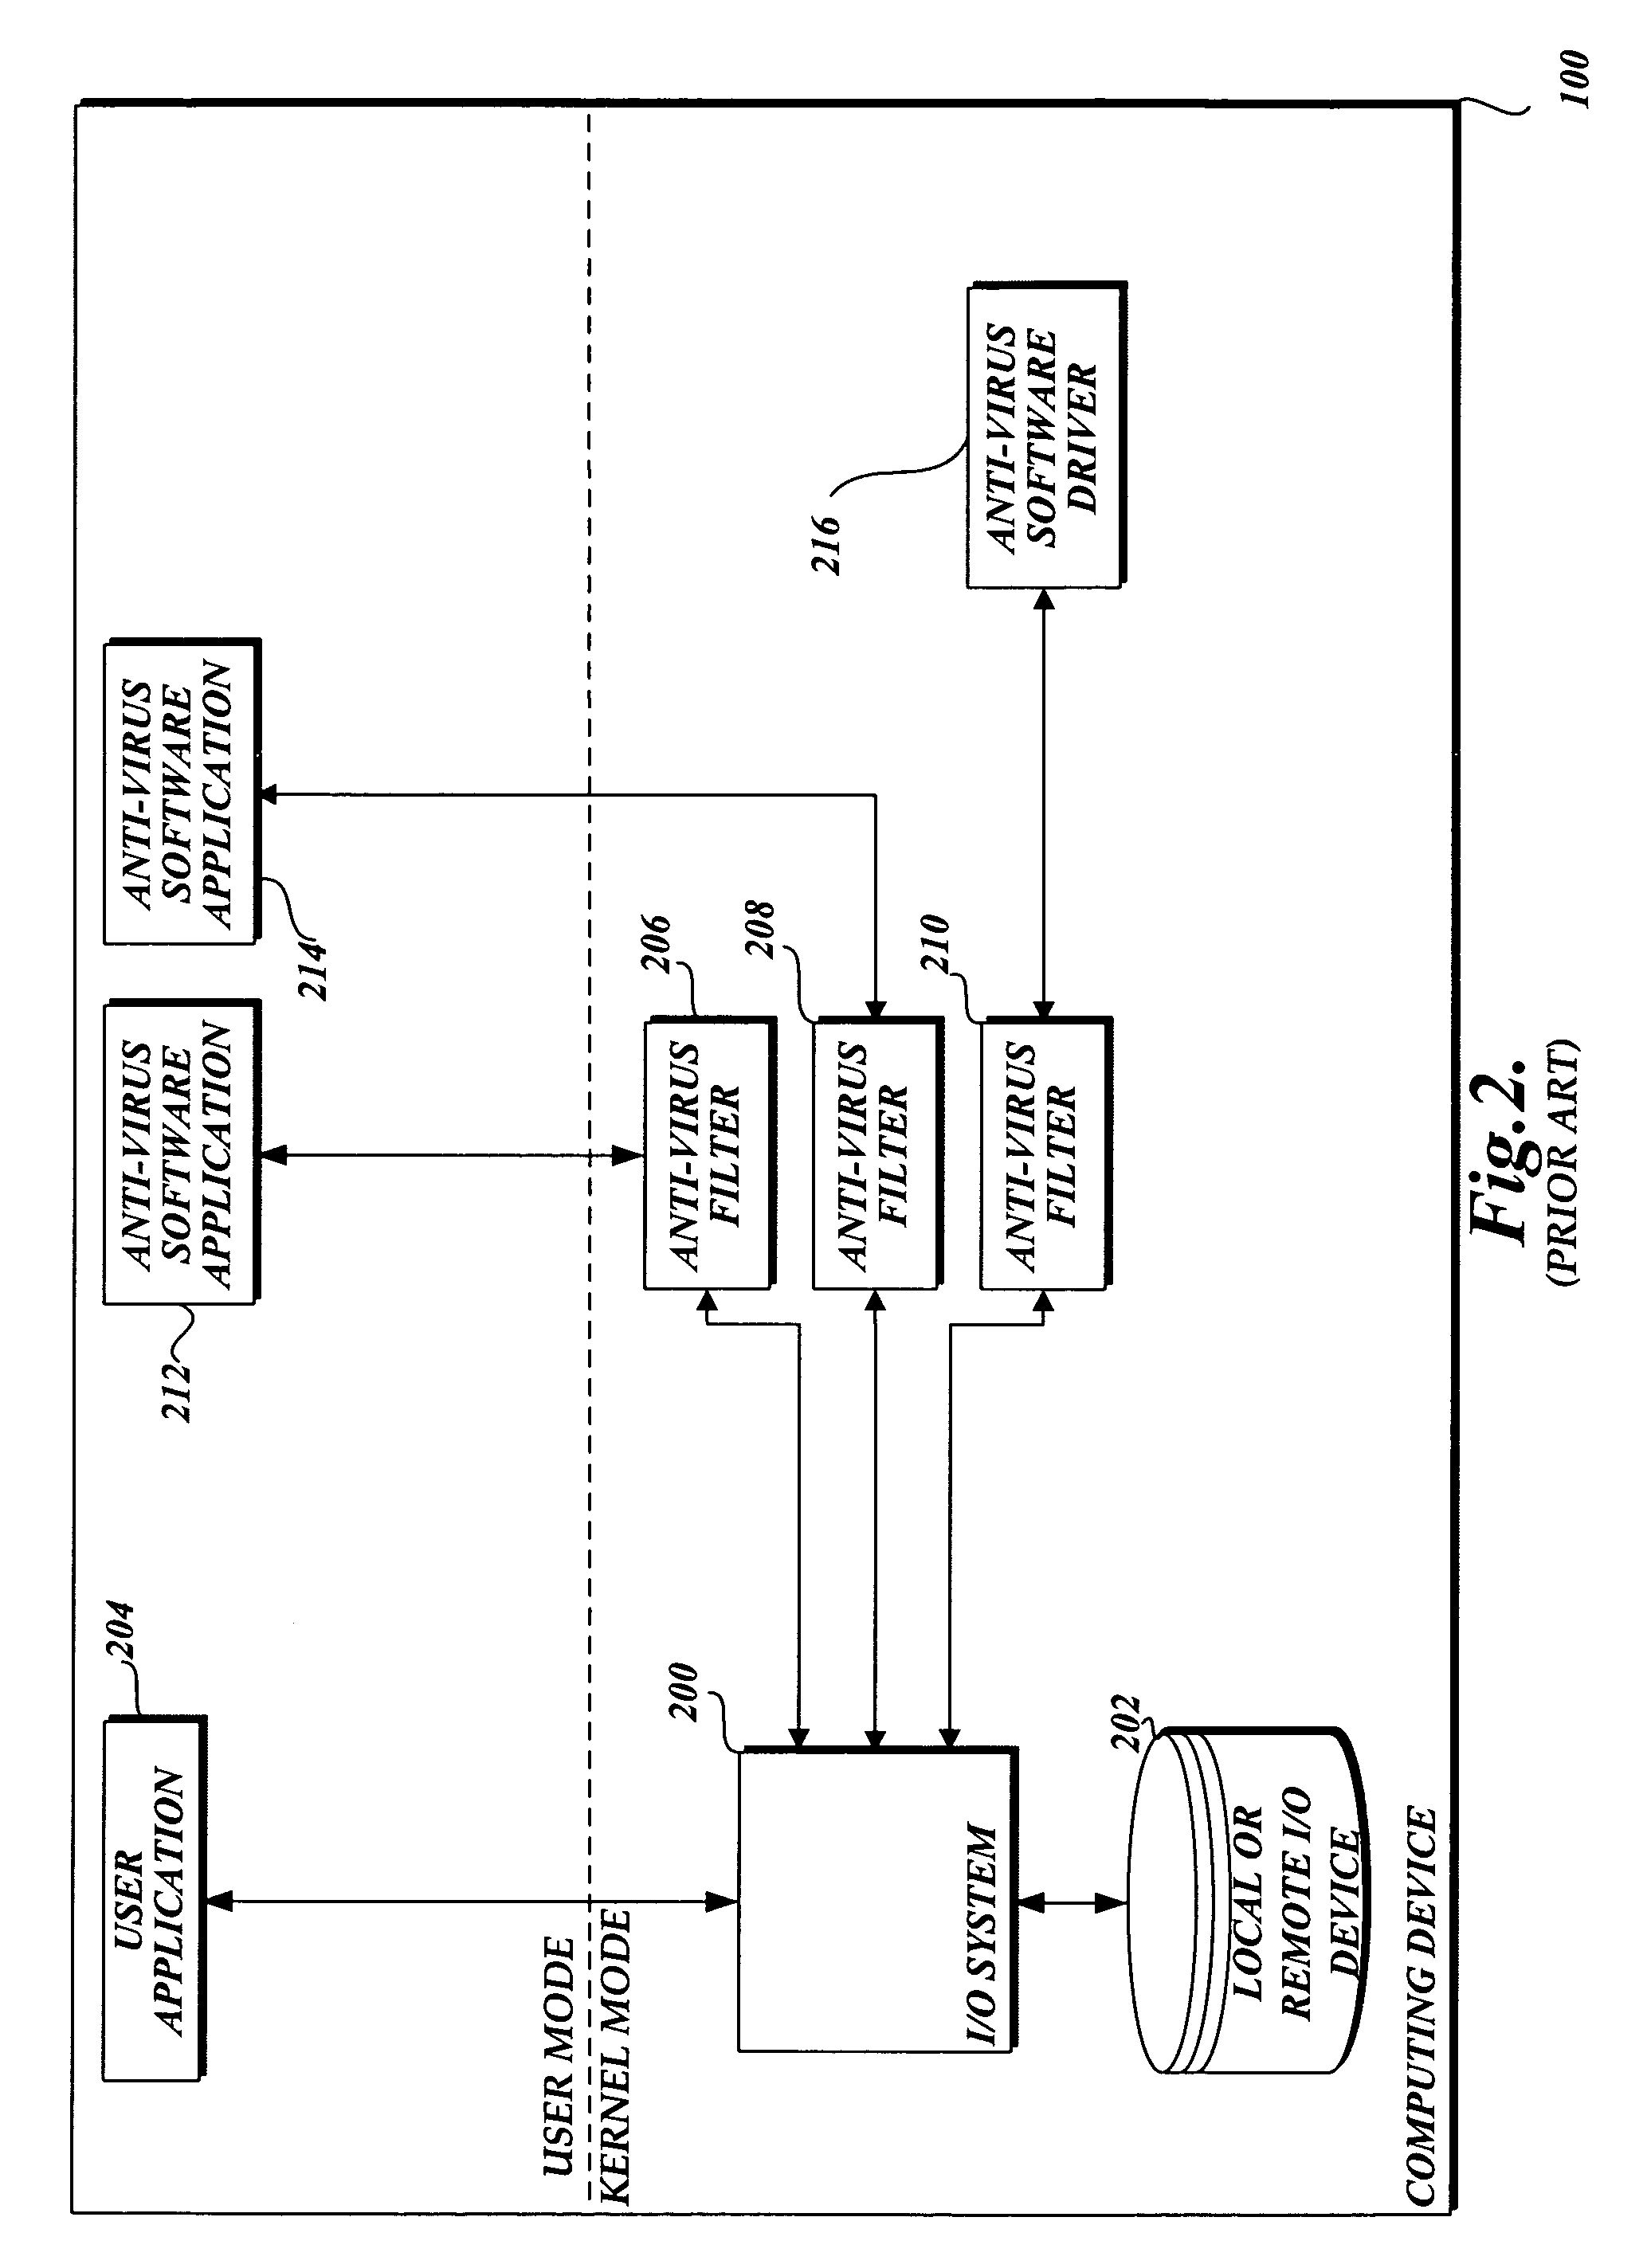 System and method of aggregating the knowledge base of antivirus software applications